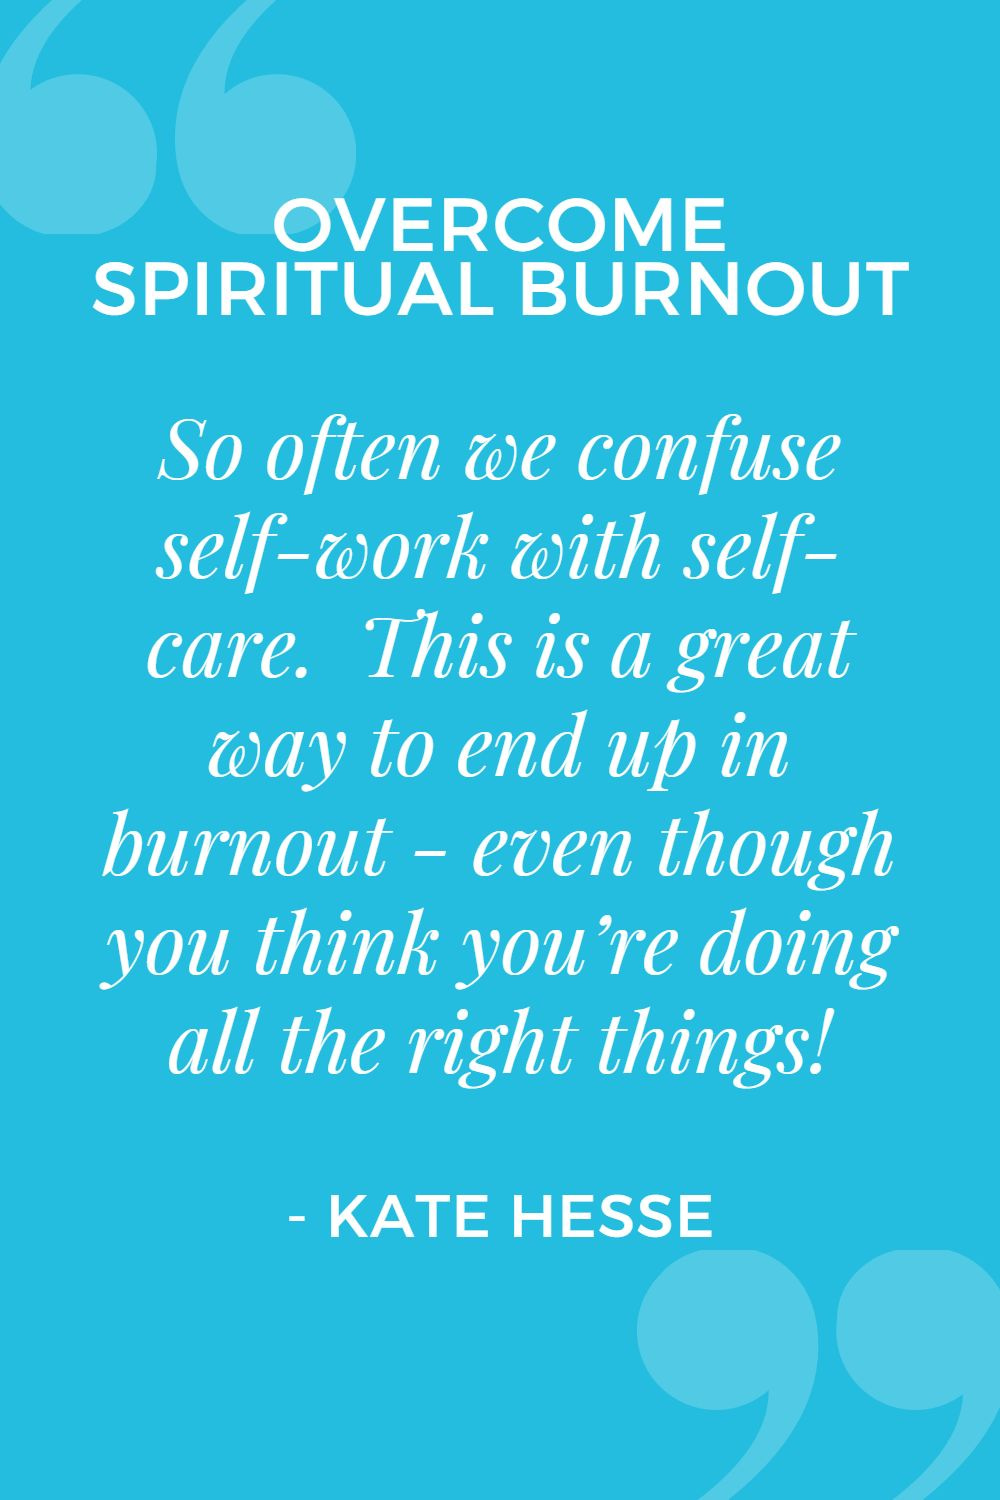 So often we confuse self-work with self-care. This is a great way to end up in burnout - even though you think you're doing all the right things!